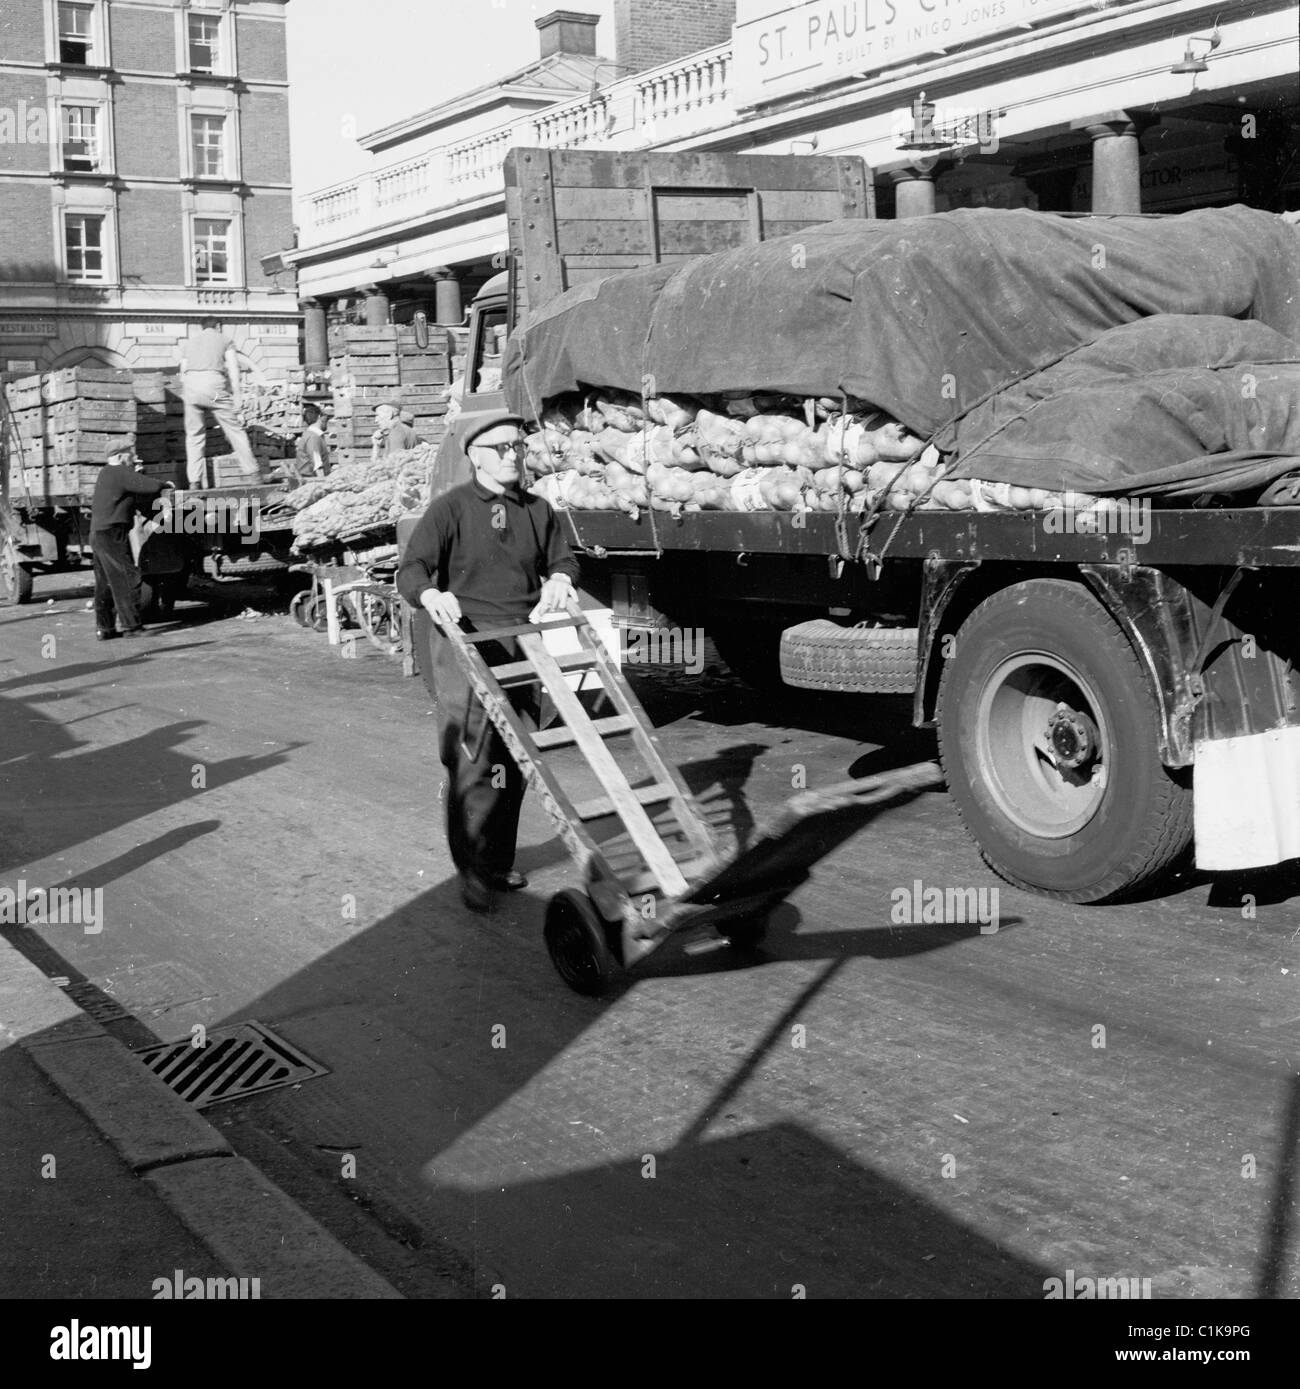 1950s. Historical picture of worker pushing an empty trolley outside St Paul's church at London's famous Covent Garden market. Stock Photo